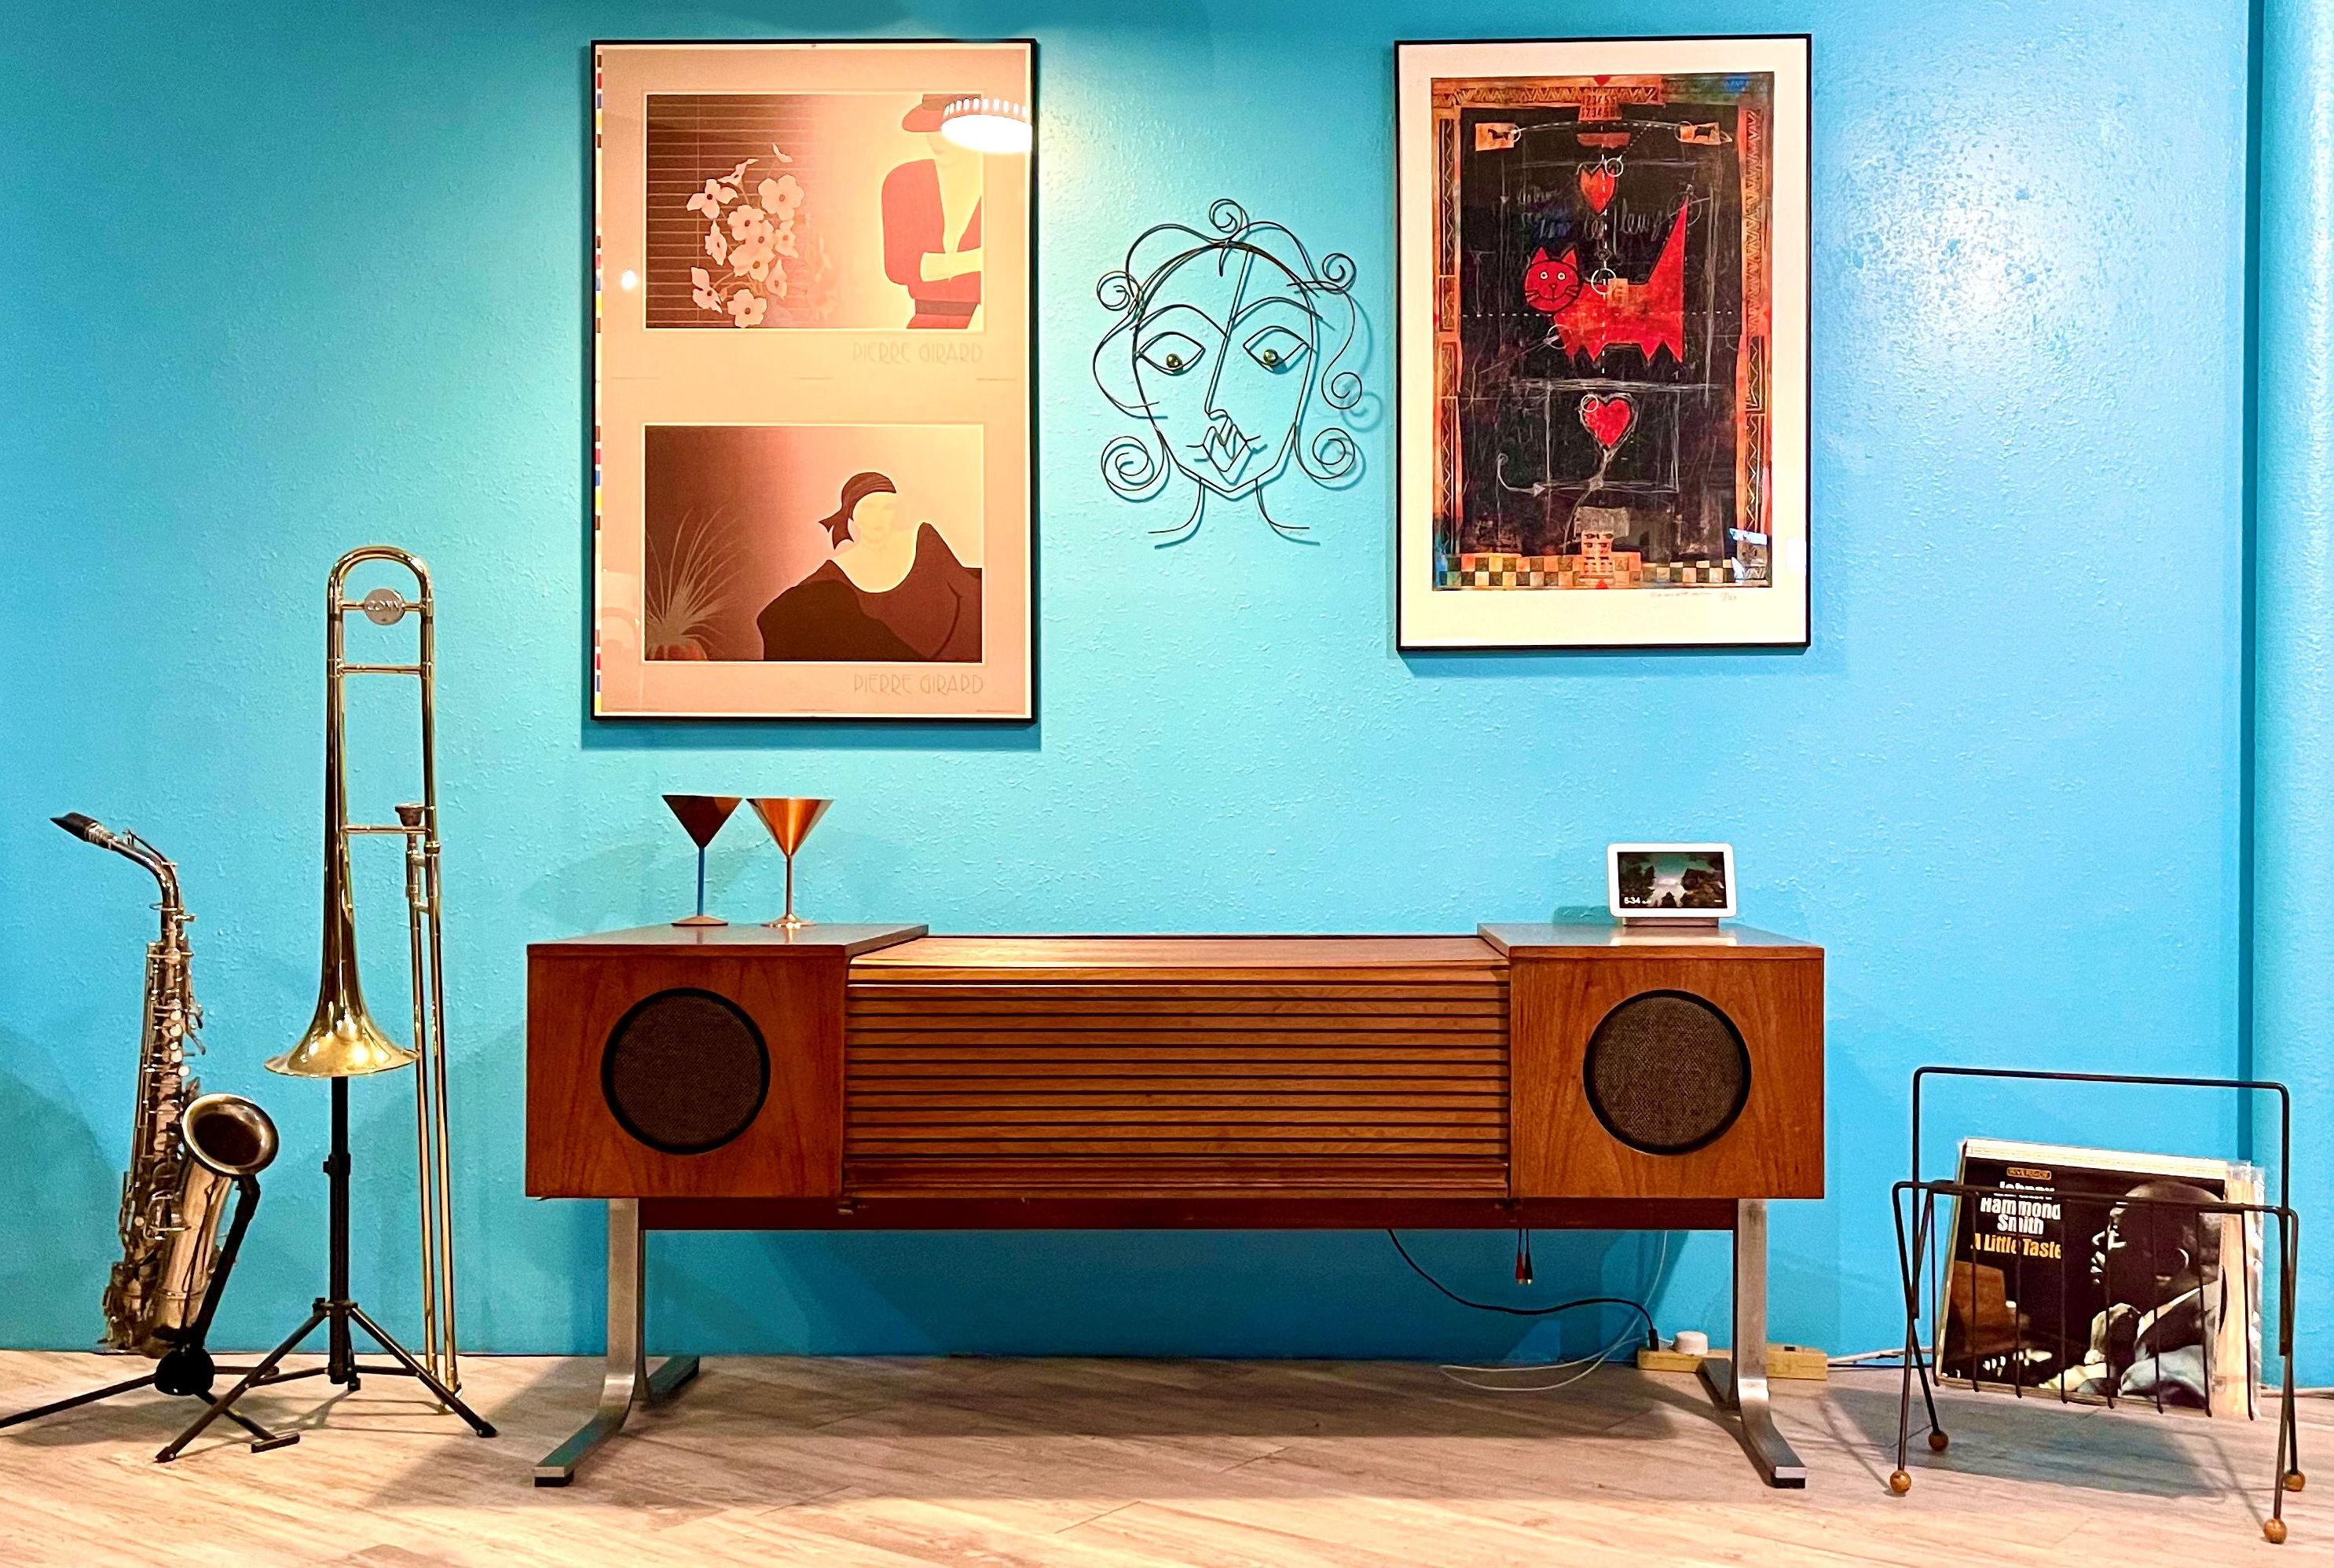 “If art decorates space… and music is the art that decorates time, then our vintage stereo consoles decorate lives by accentuating both.” 

This console:
We acquire our pieces from very reliable, established, and trustworthy sources.
We offer them